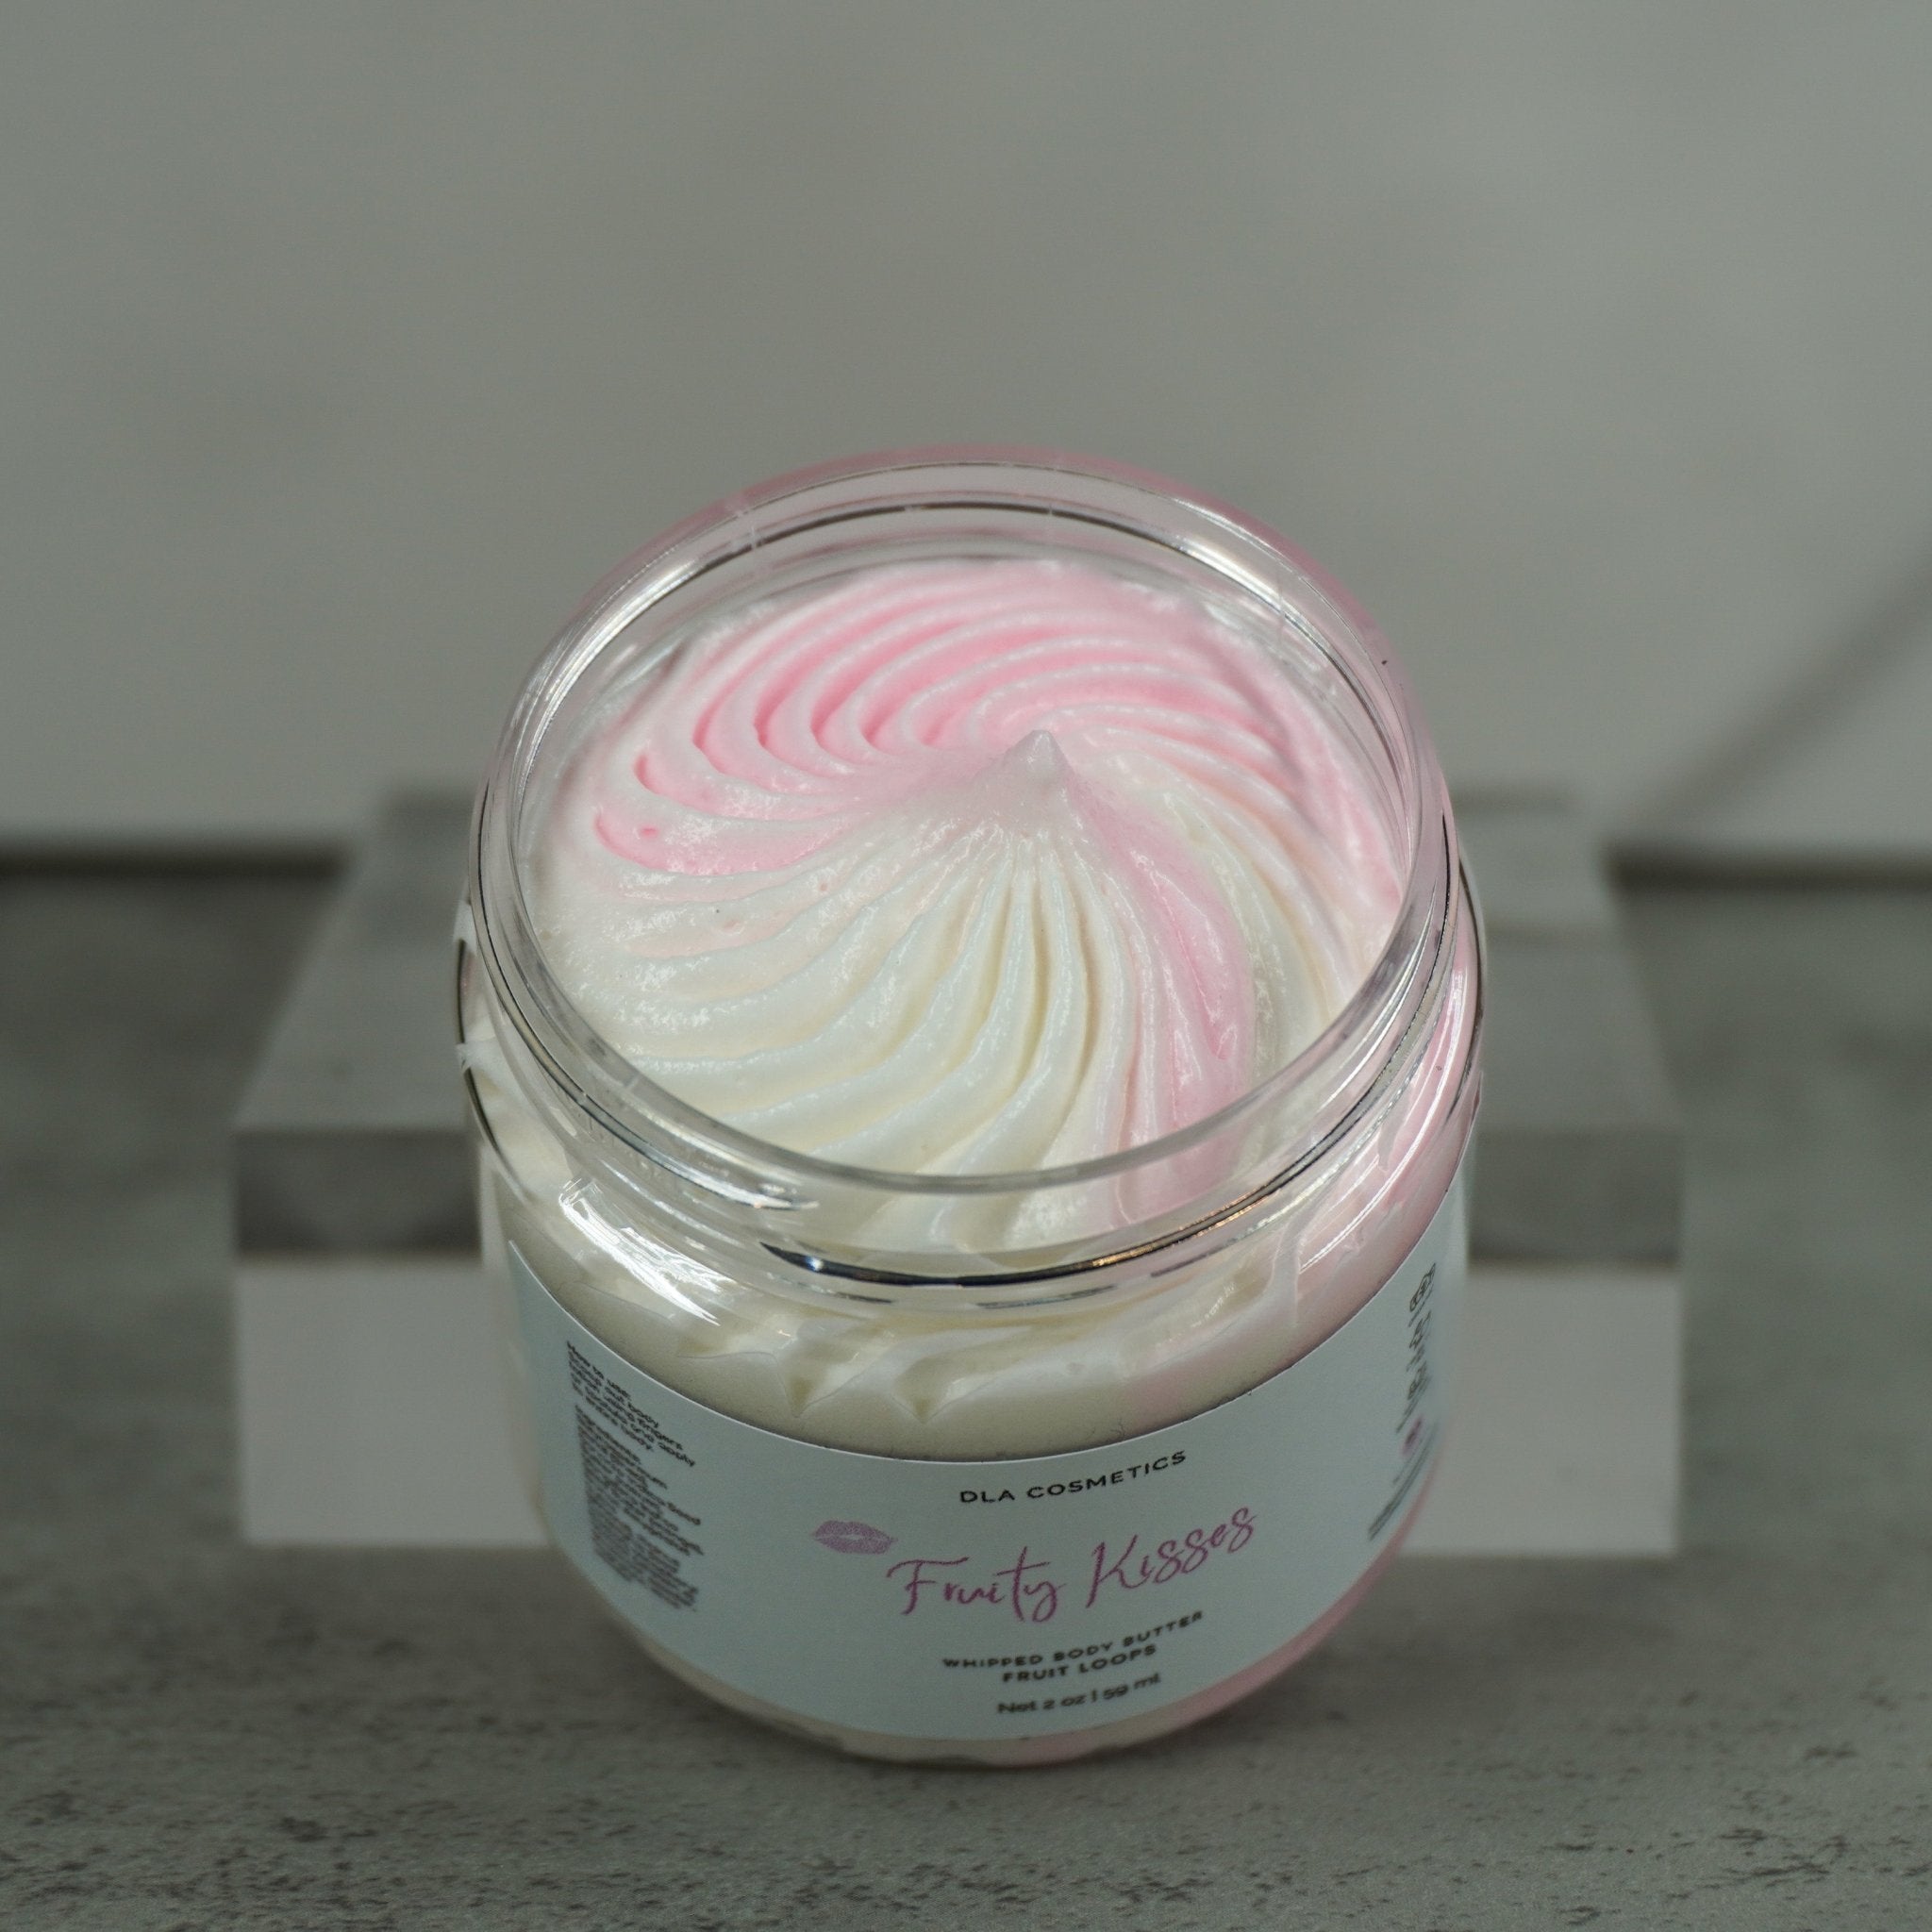 FRUITY KISSES BODY BUTTER - DLA Cosmetics-Best body skin care products